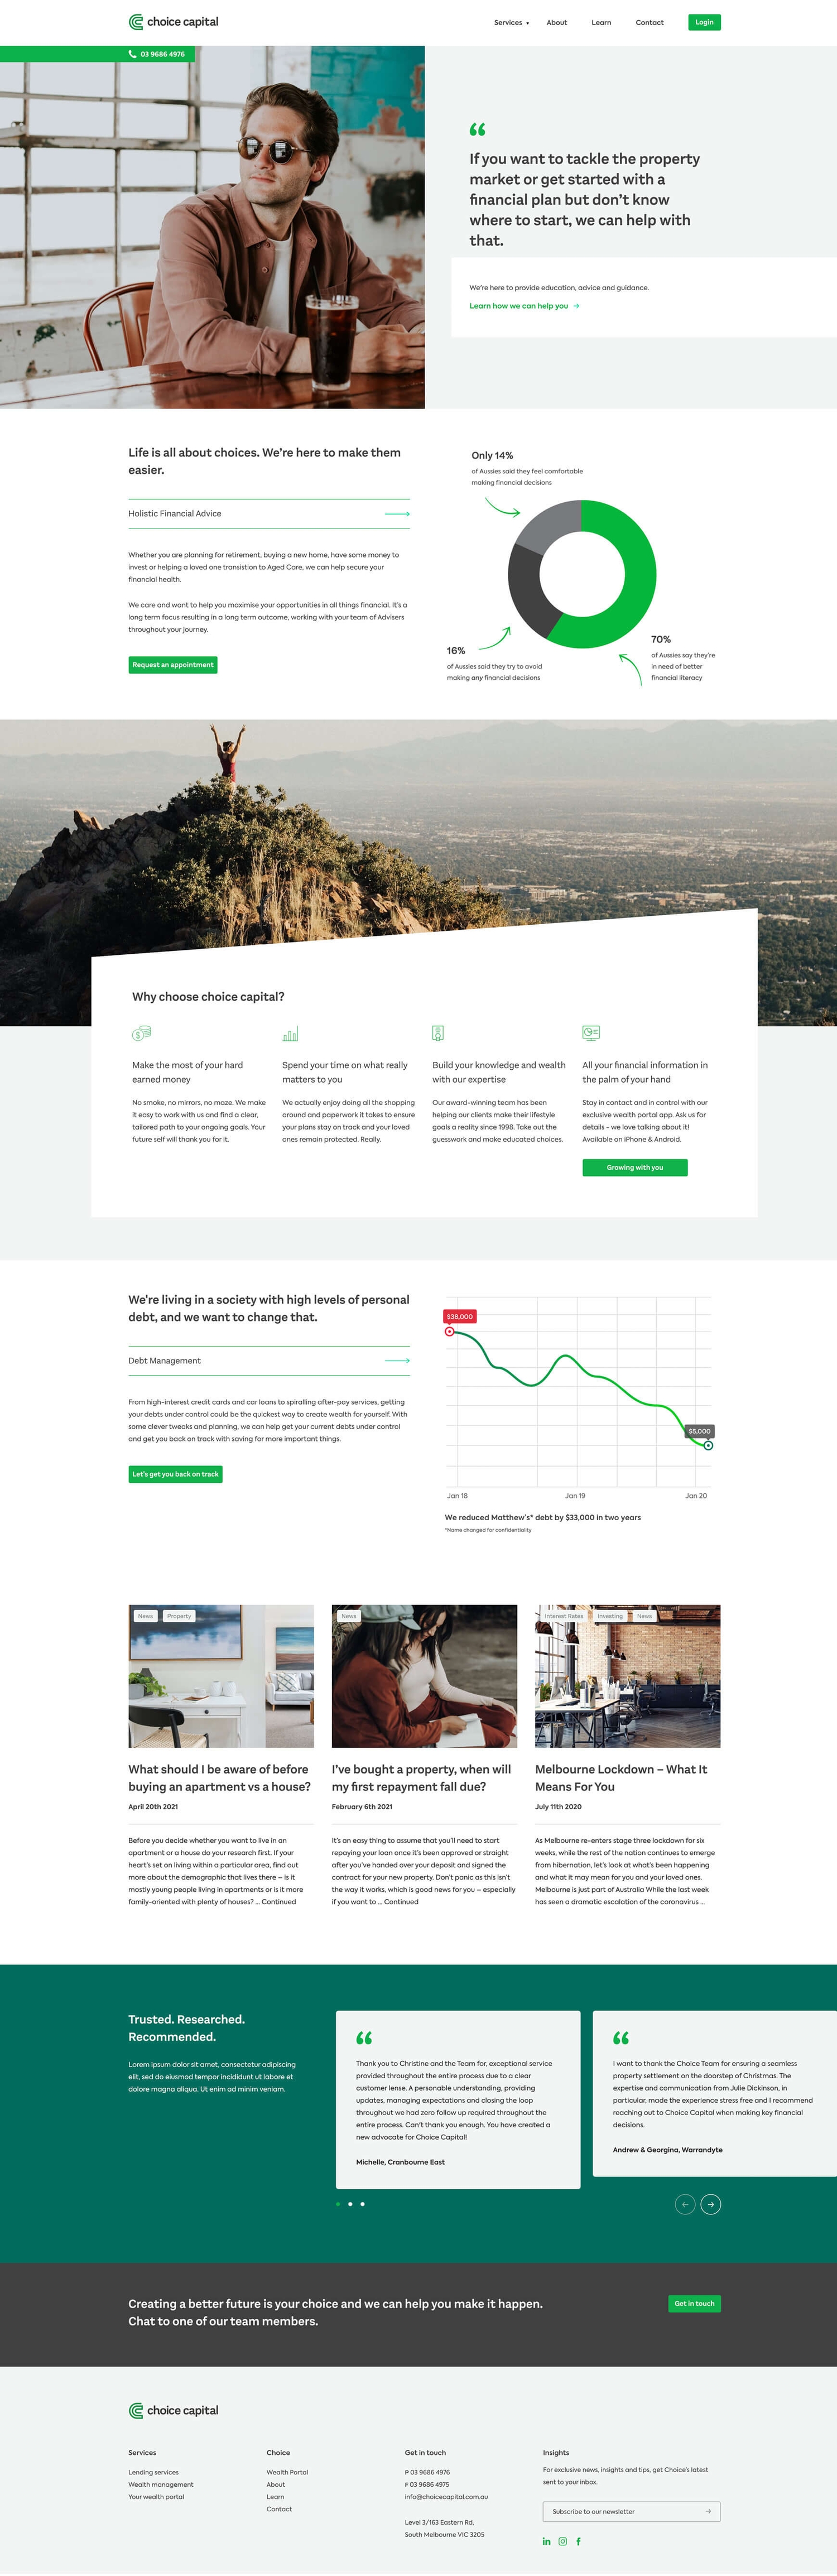 Choice Capital - Brand and Website - Finance UX Homepage Design | Atollon - a design company